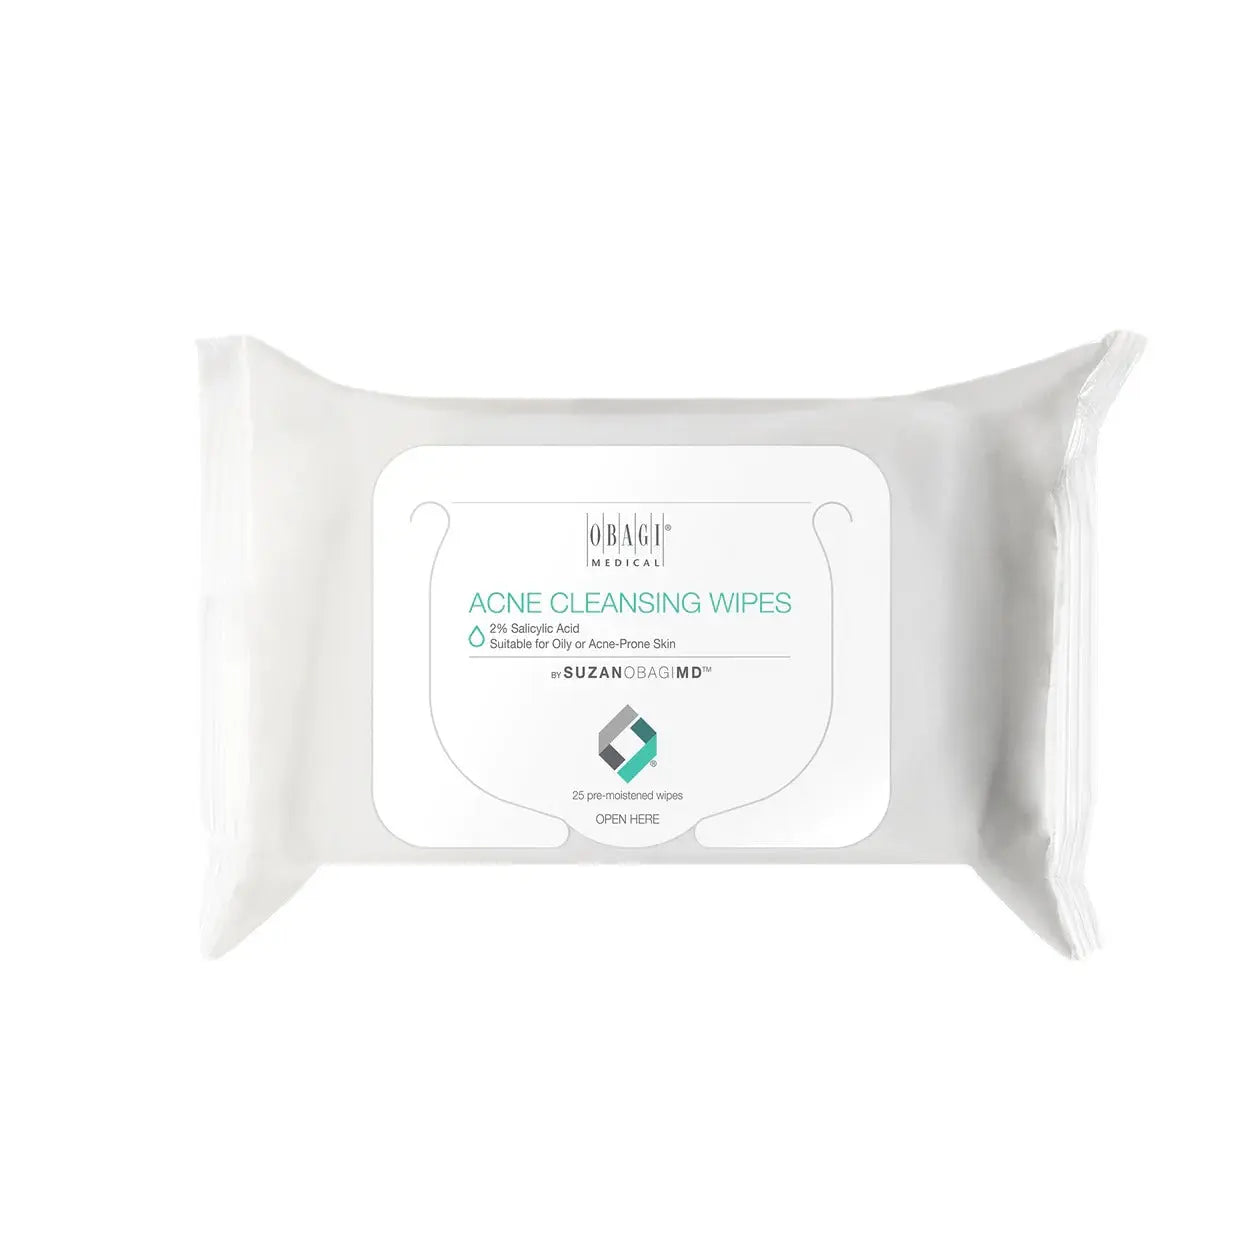 SUZANOBAGIMD­ Acne Cleansing Wipe: Pre-Moistened & Textured